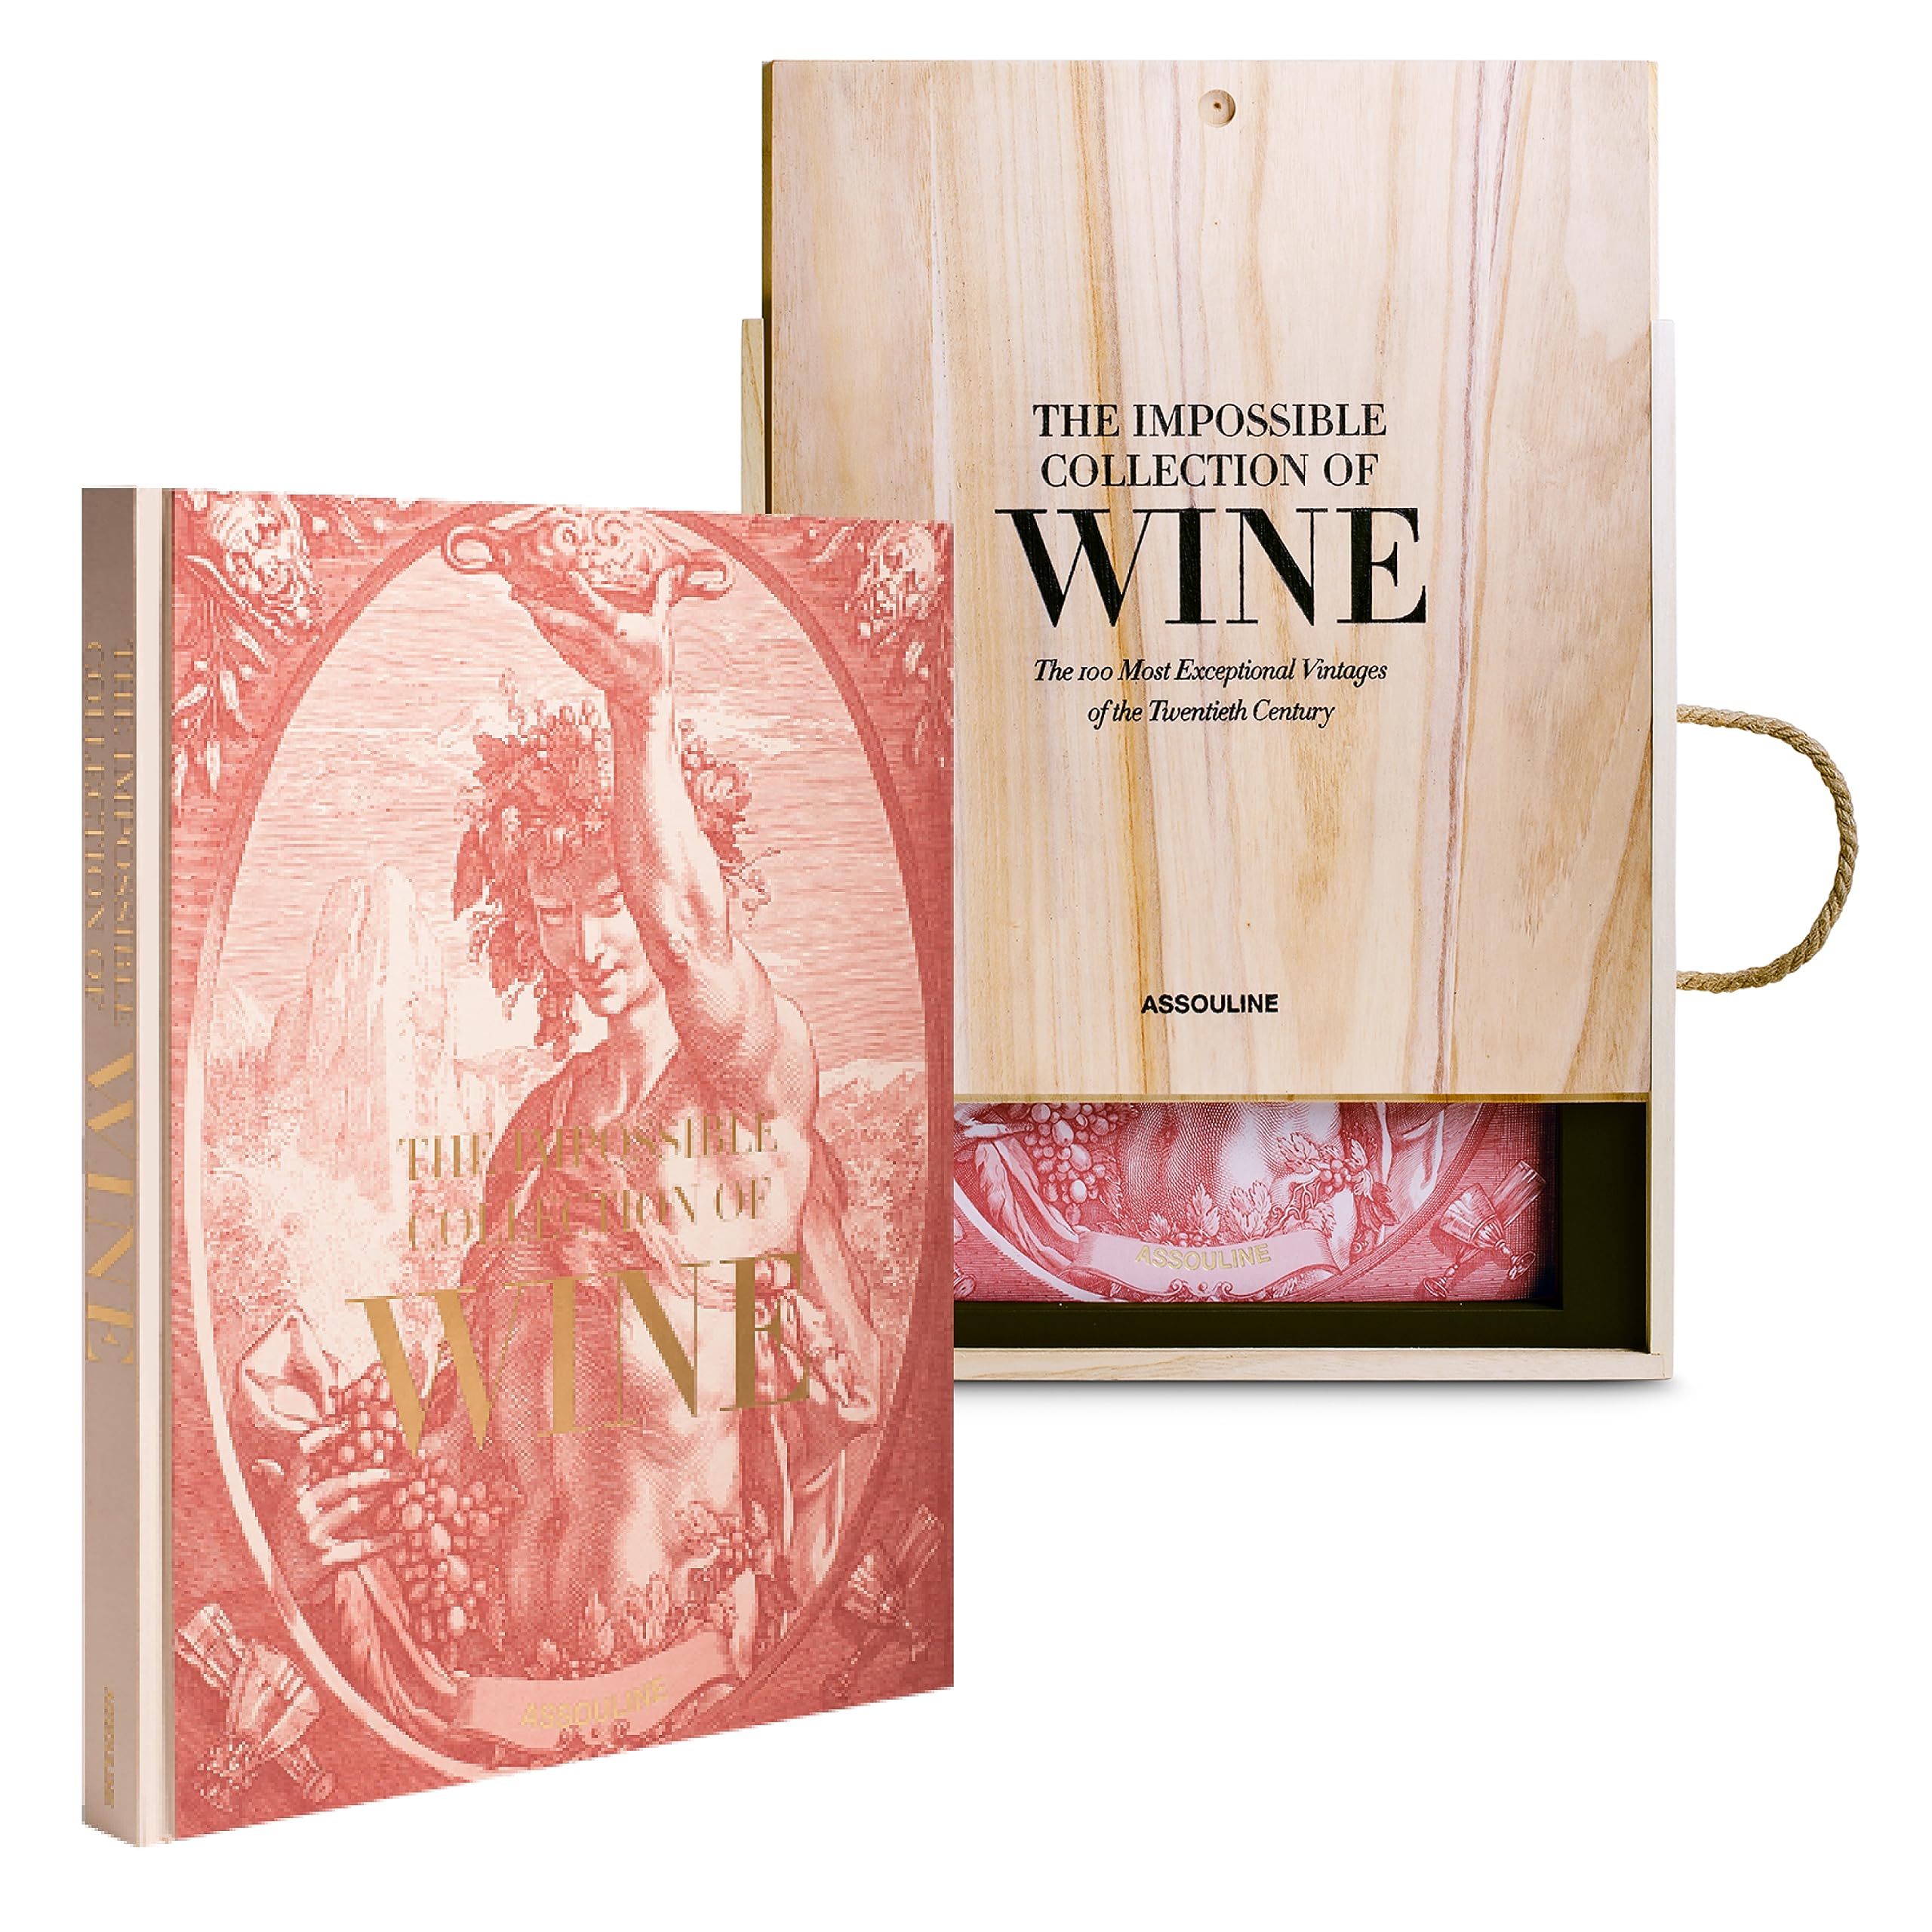 The Impossible Collection of Wine by Enrico Bernardo